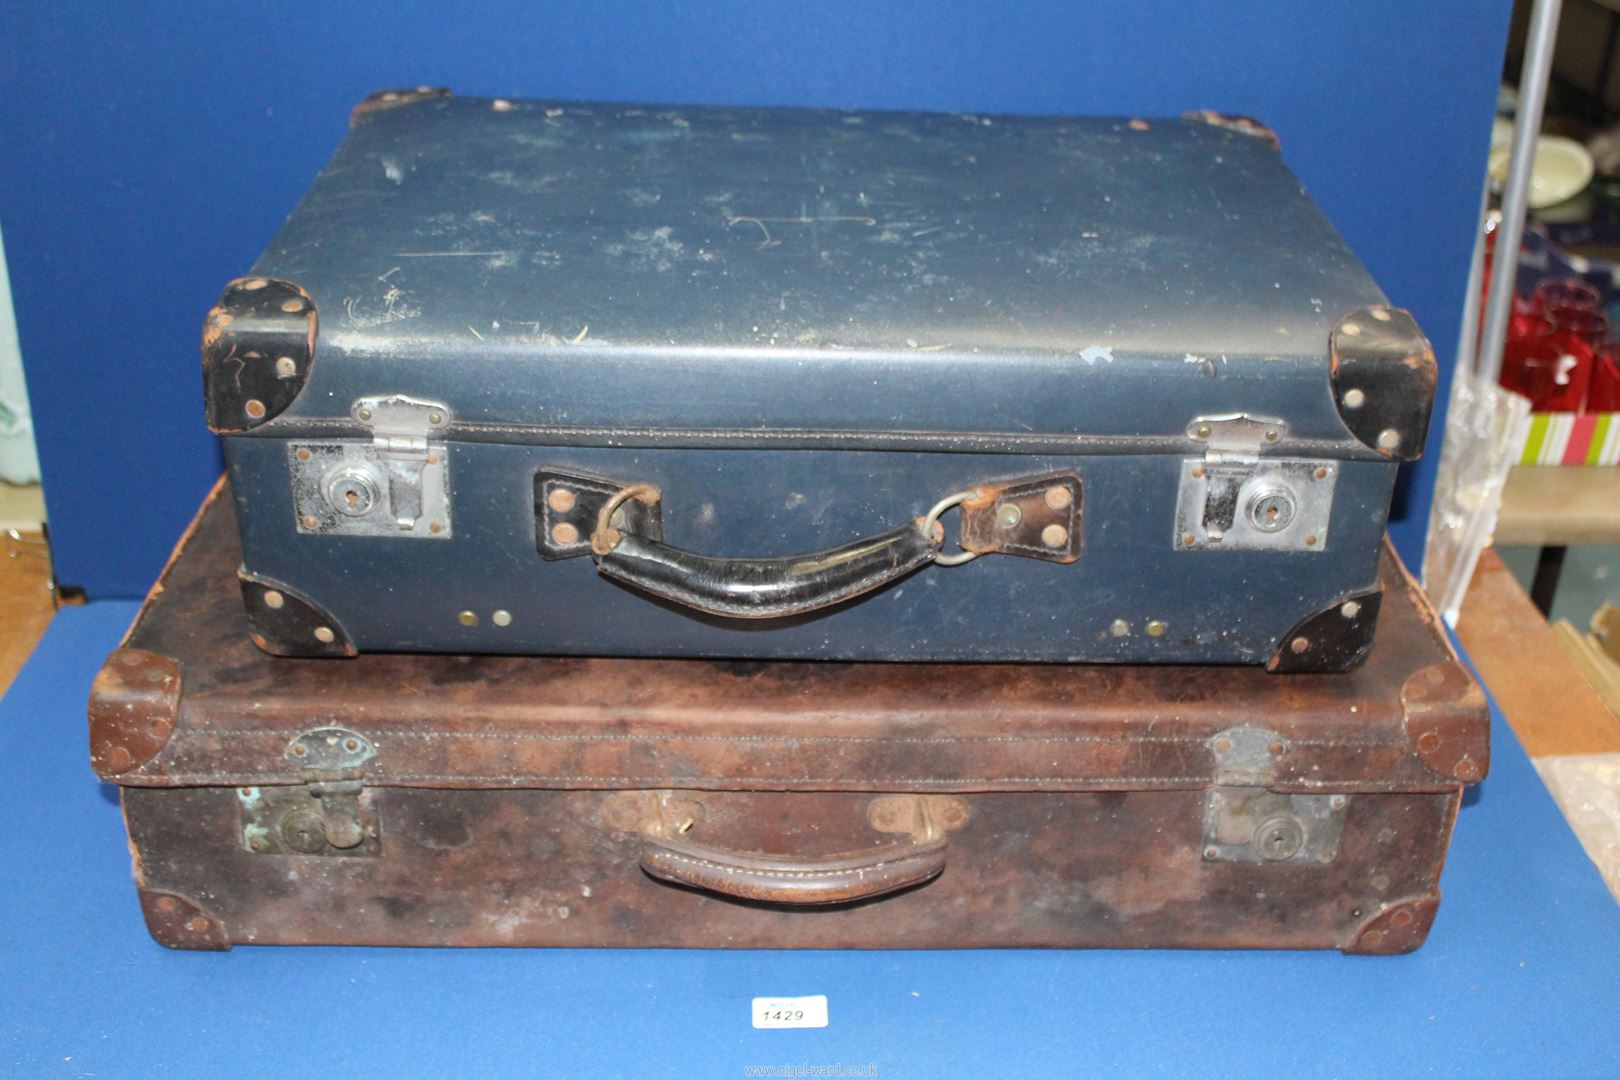 A blue Antler suitcase and a brown leather suitcase, a/f.